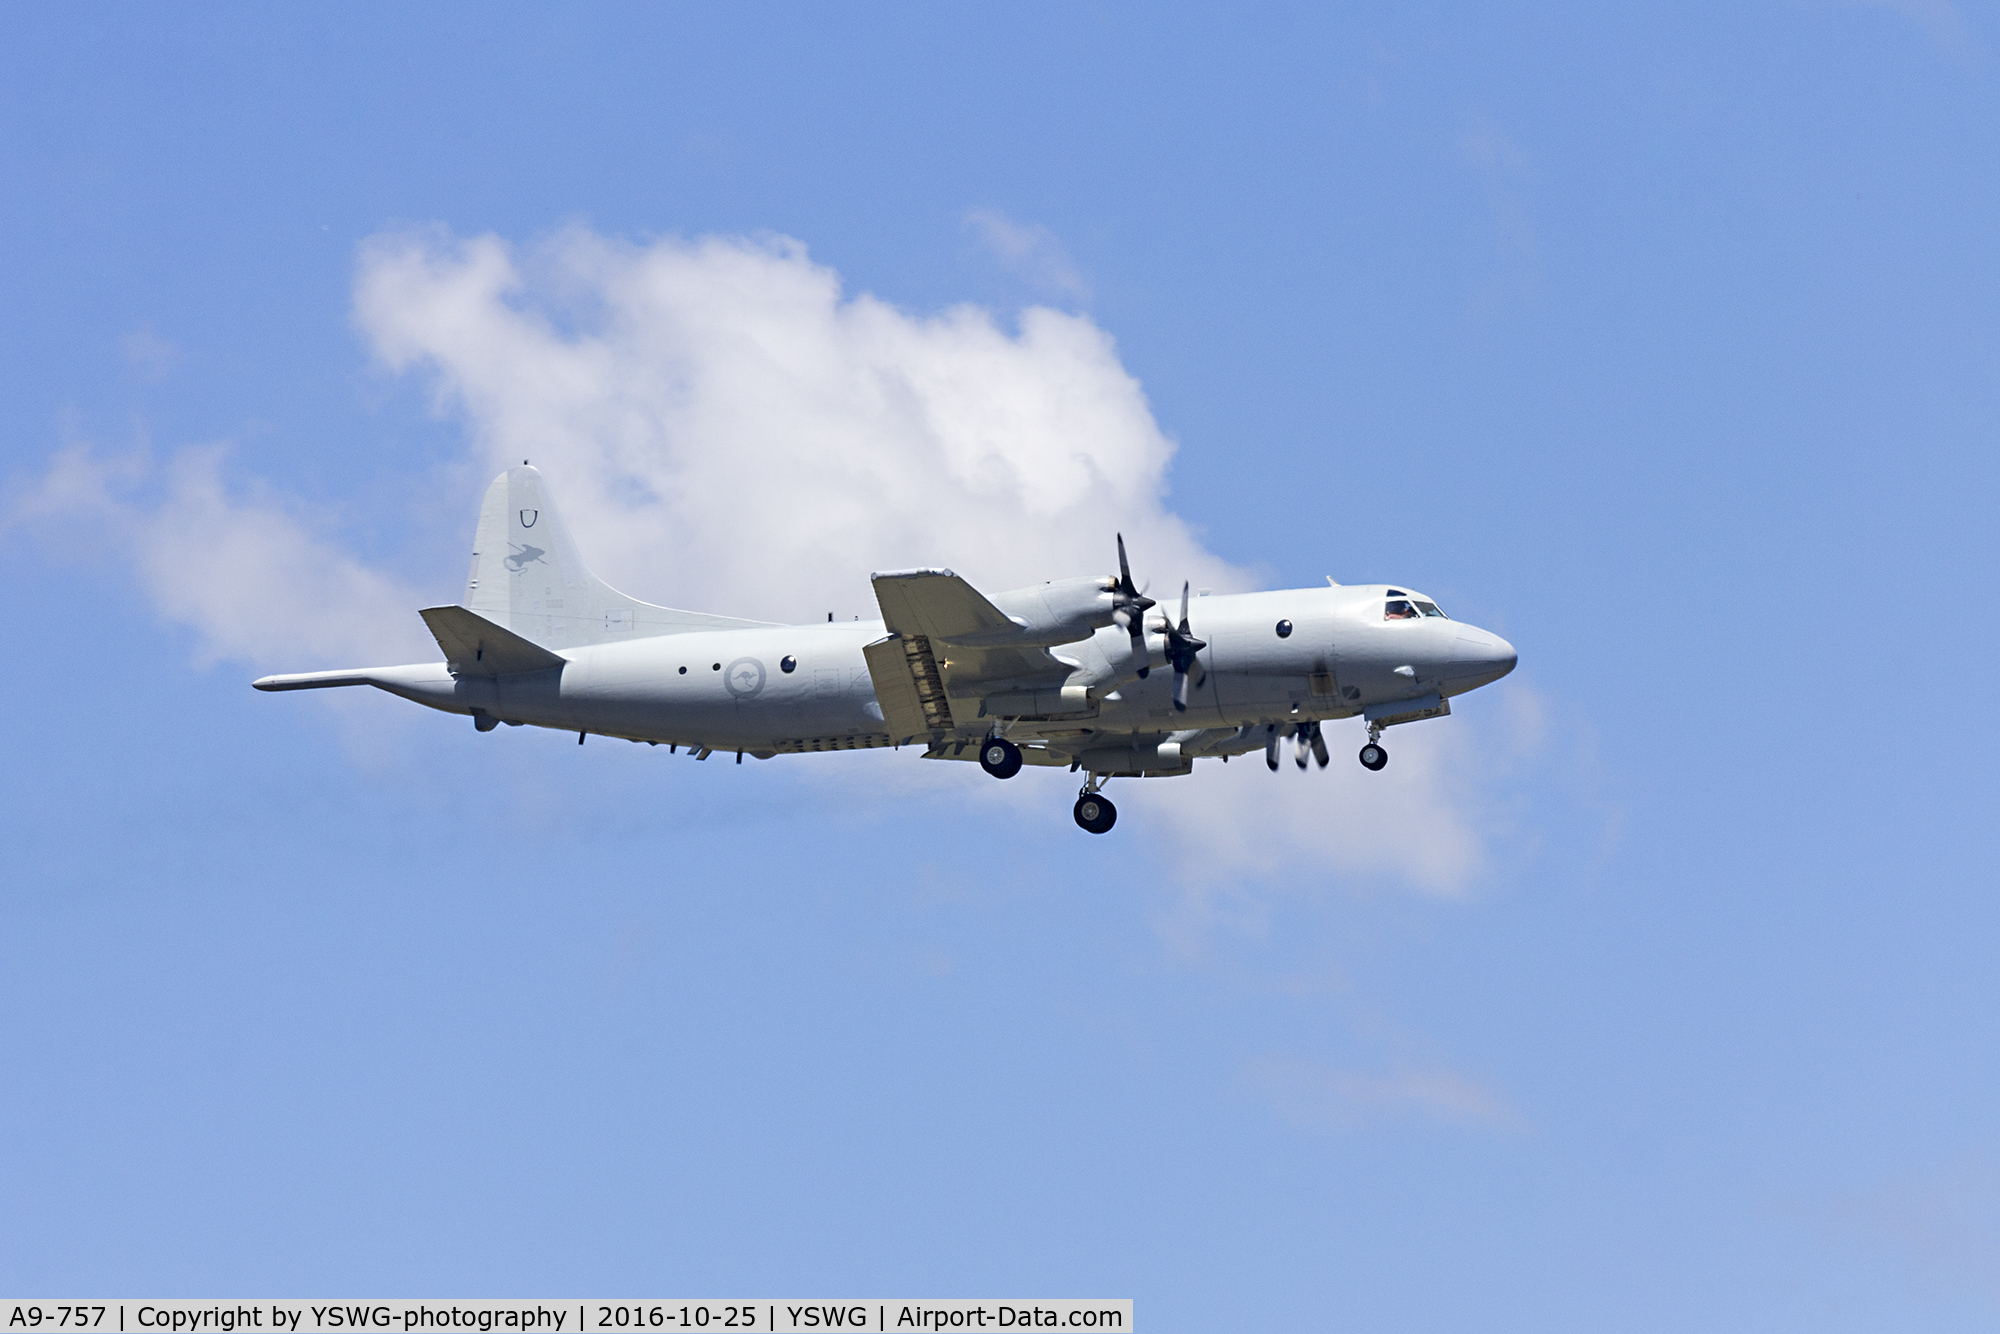 A9-757, Lockheed AP-3C Orion C/N 285D-5668, RAAF (A9-757) Lockheed AP-3C Orion missed approach at Wagga Wagga Airport.